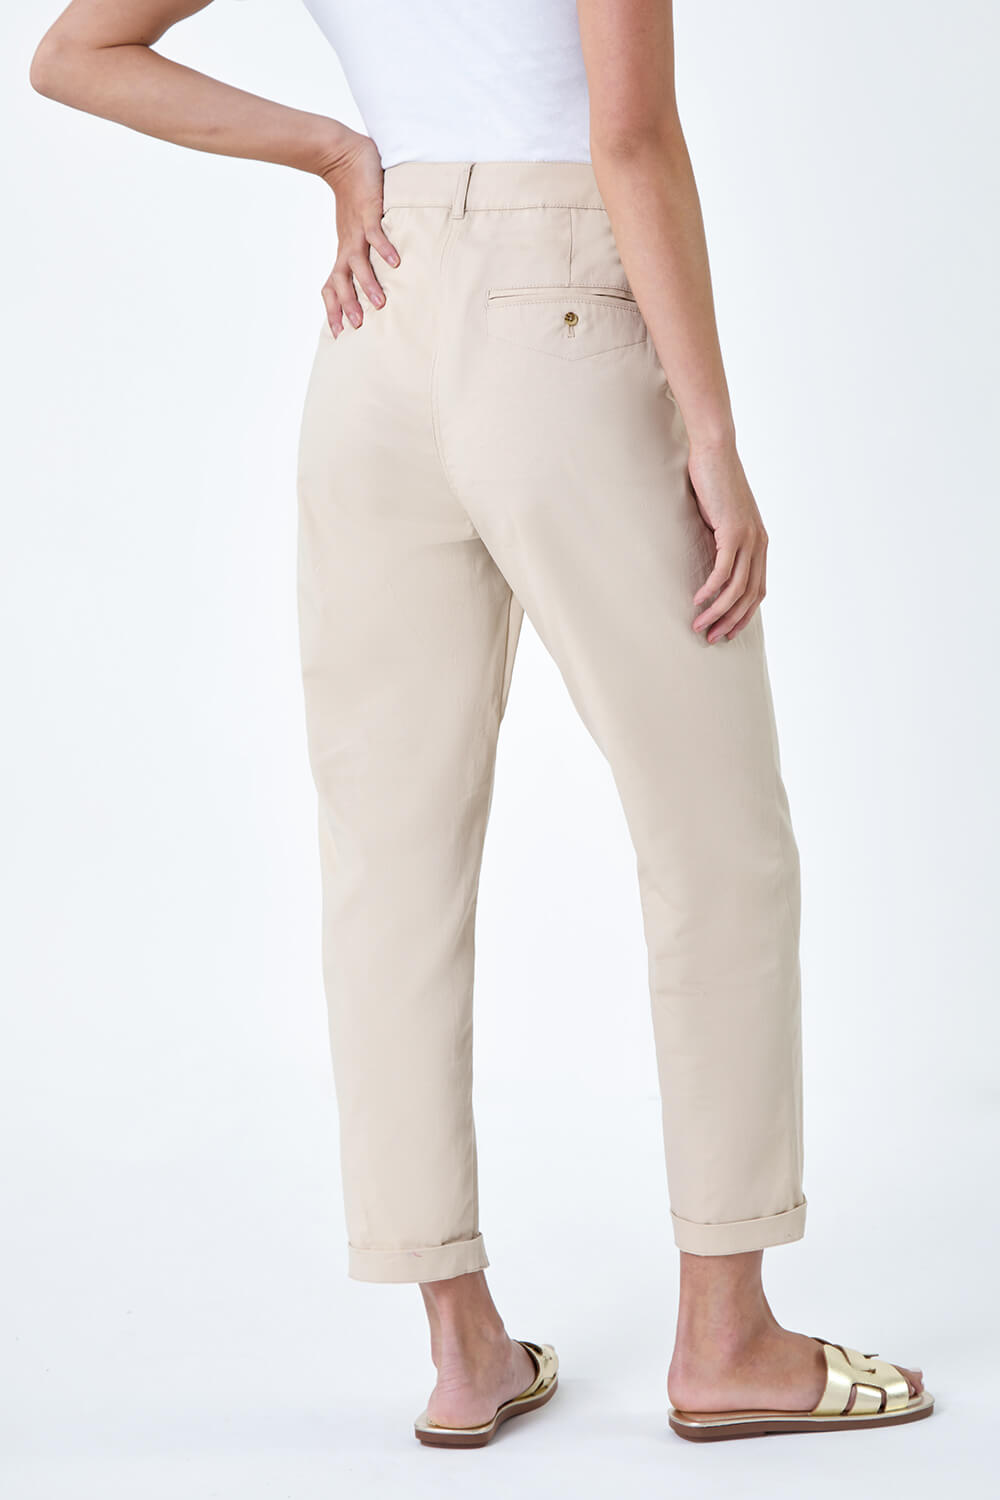 Stone Petite Cotton Blend Stretch Chino Trousers, Image 3 of 5